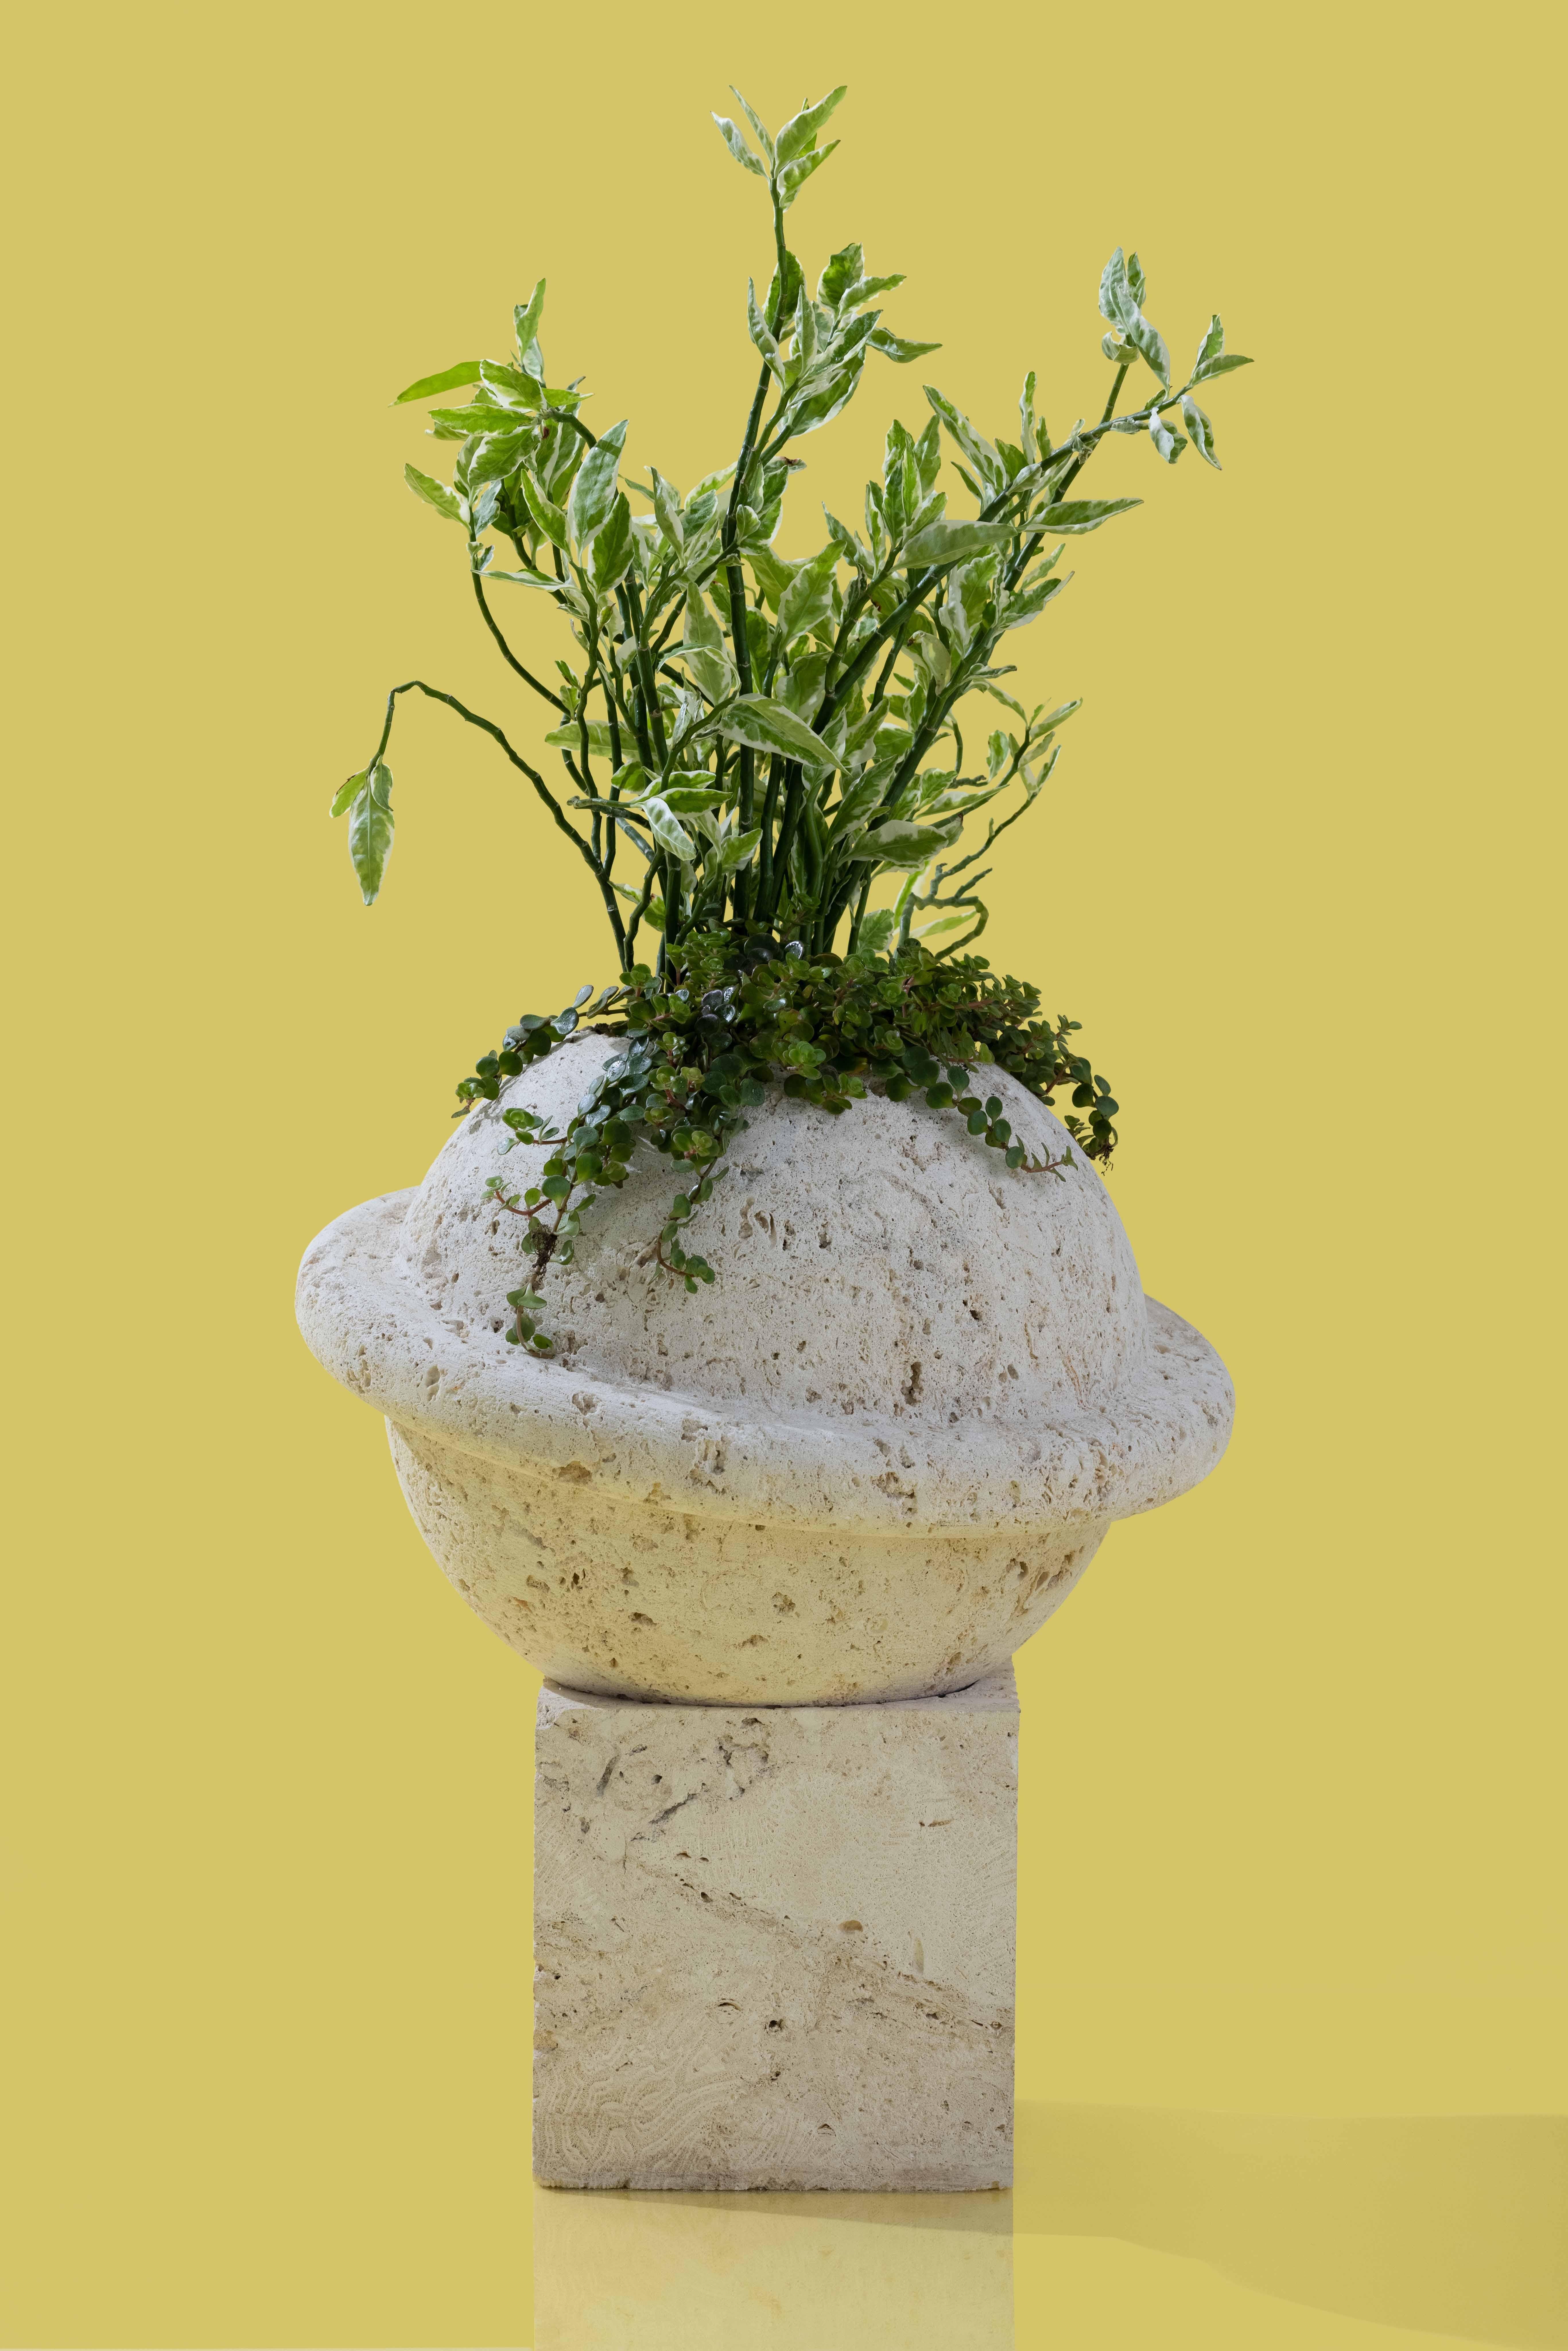 Made to order keystone Saturn with base. 16” diameter 20” ring with 10x10” base.

Inspired by Coral Castle, an oolite limestone structure
created by the Latvian-American eccentric Edward
Leedskalnin in the 1920’s during a time where there